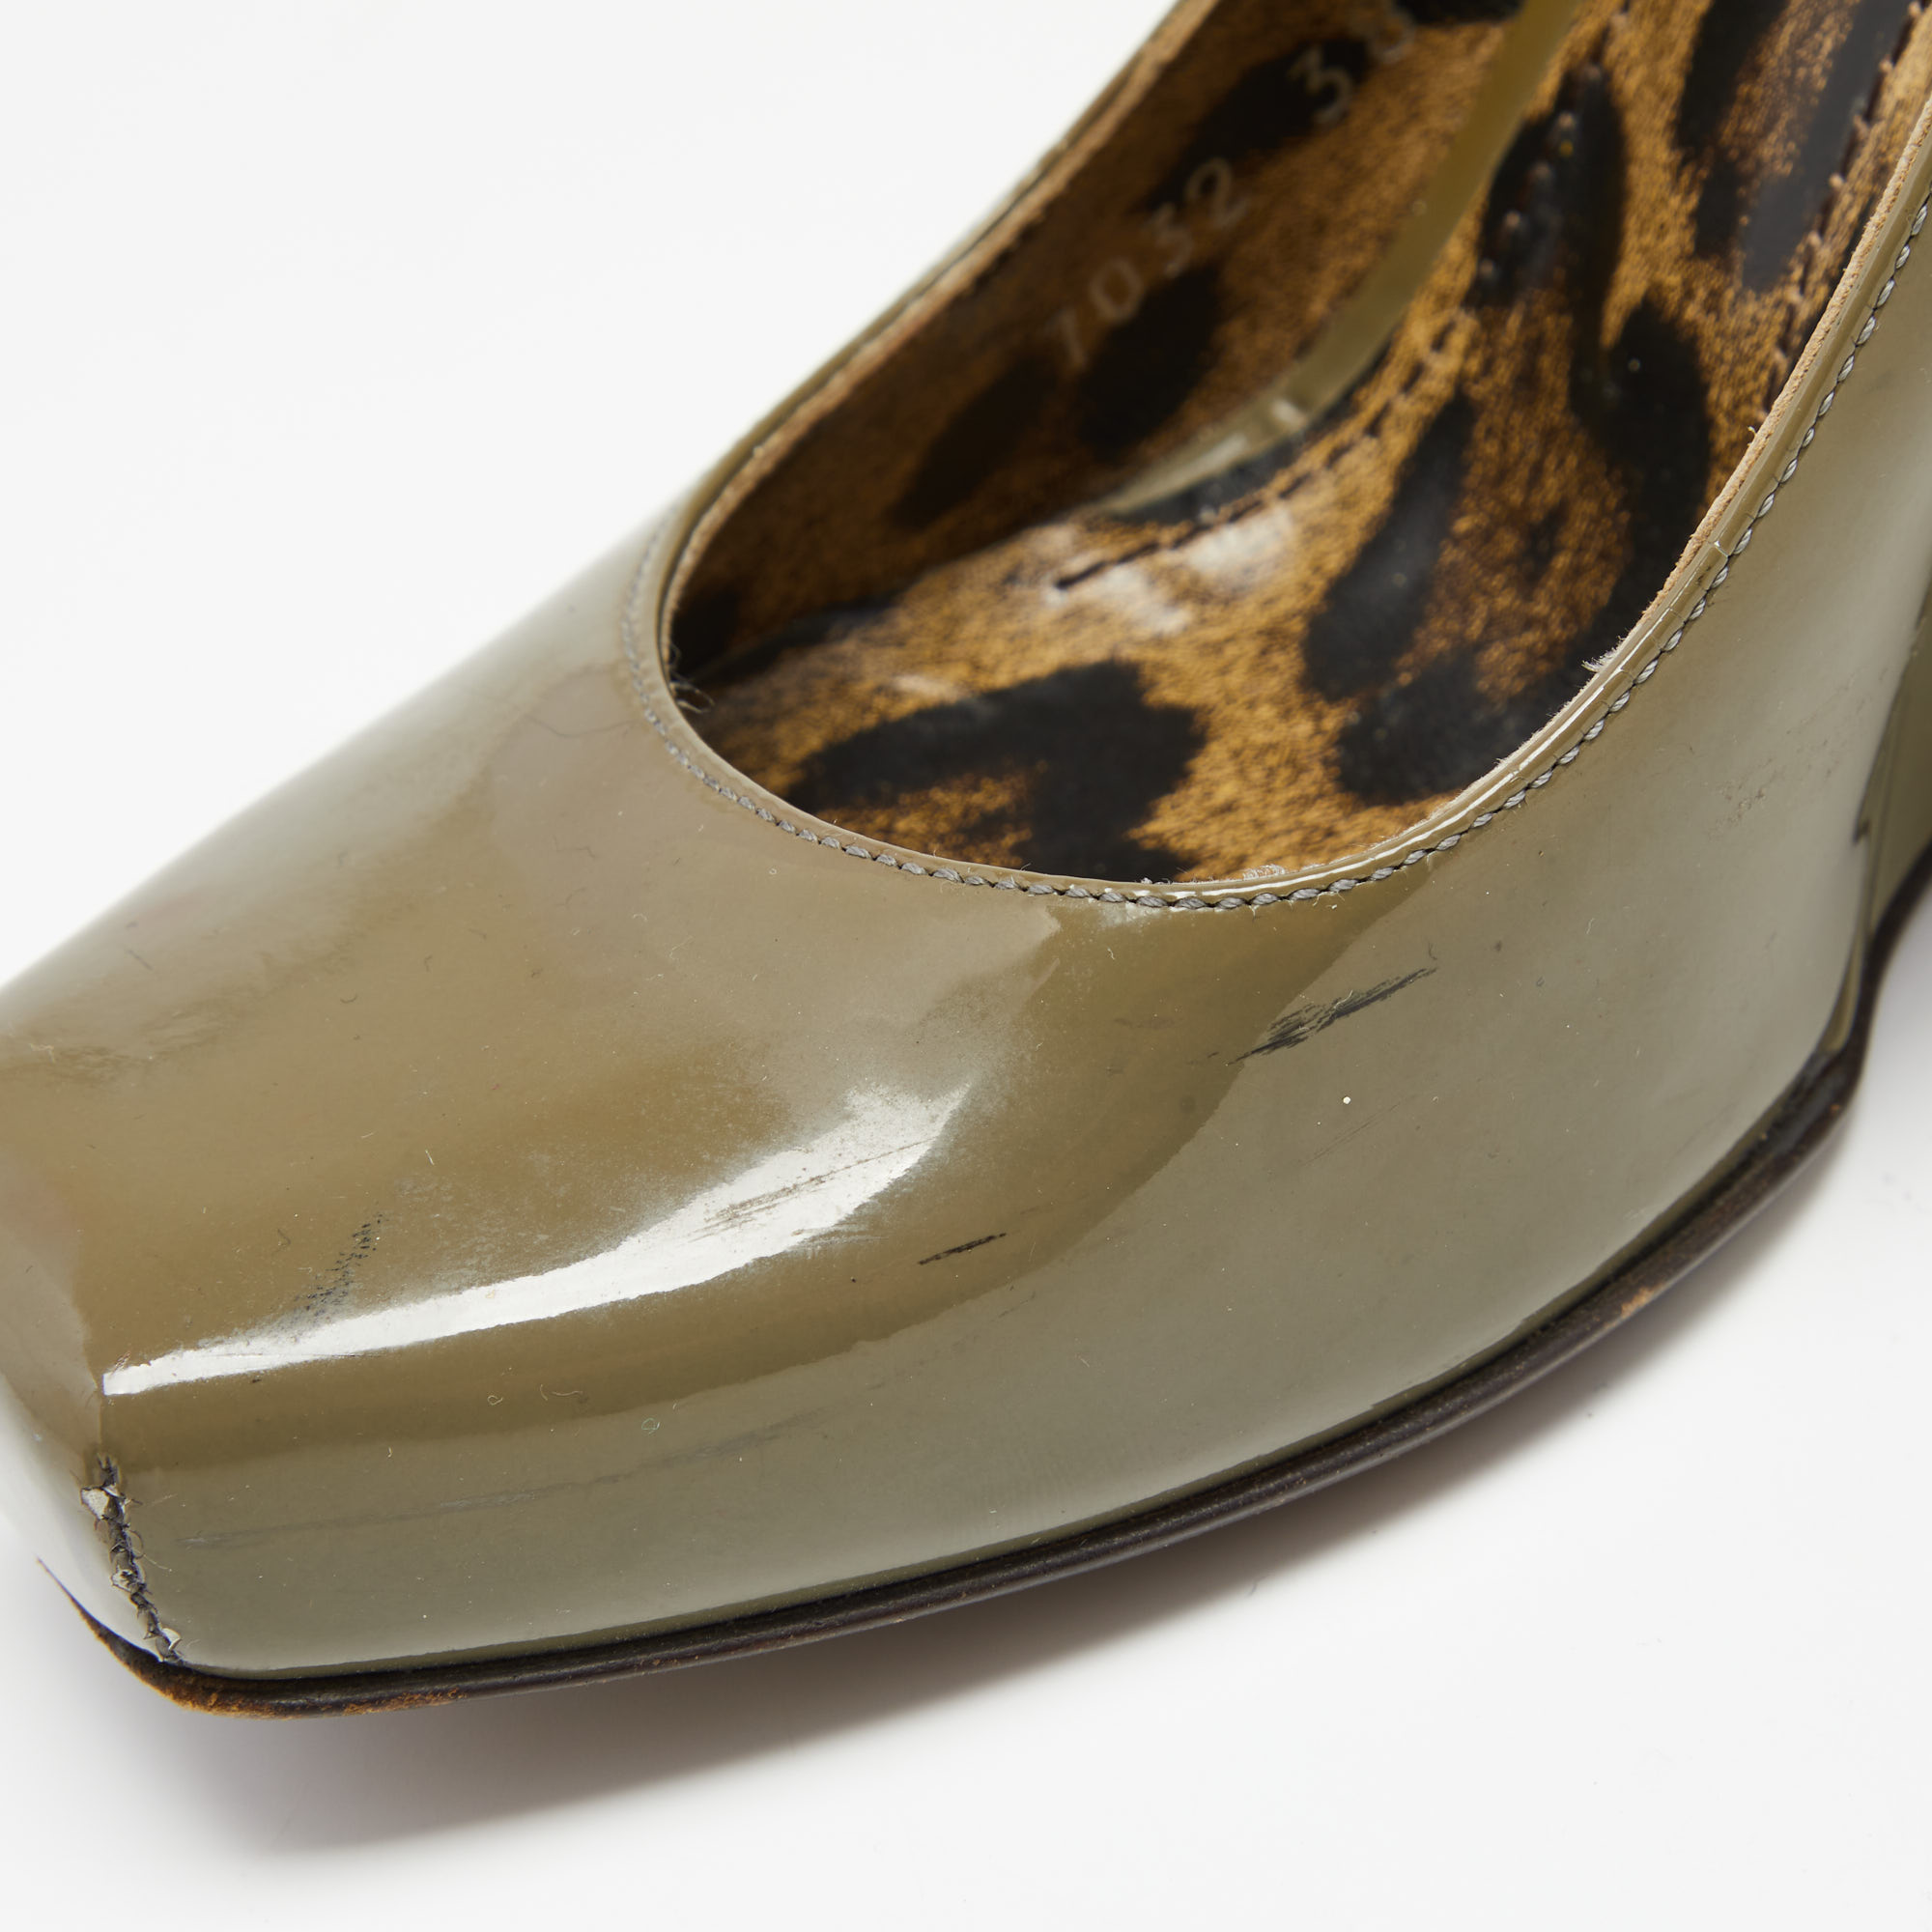 Dolce & Gabbana Olive Green Patent Leather Wedge  Pumps Size 38